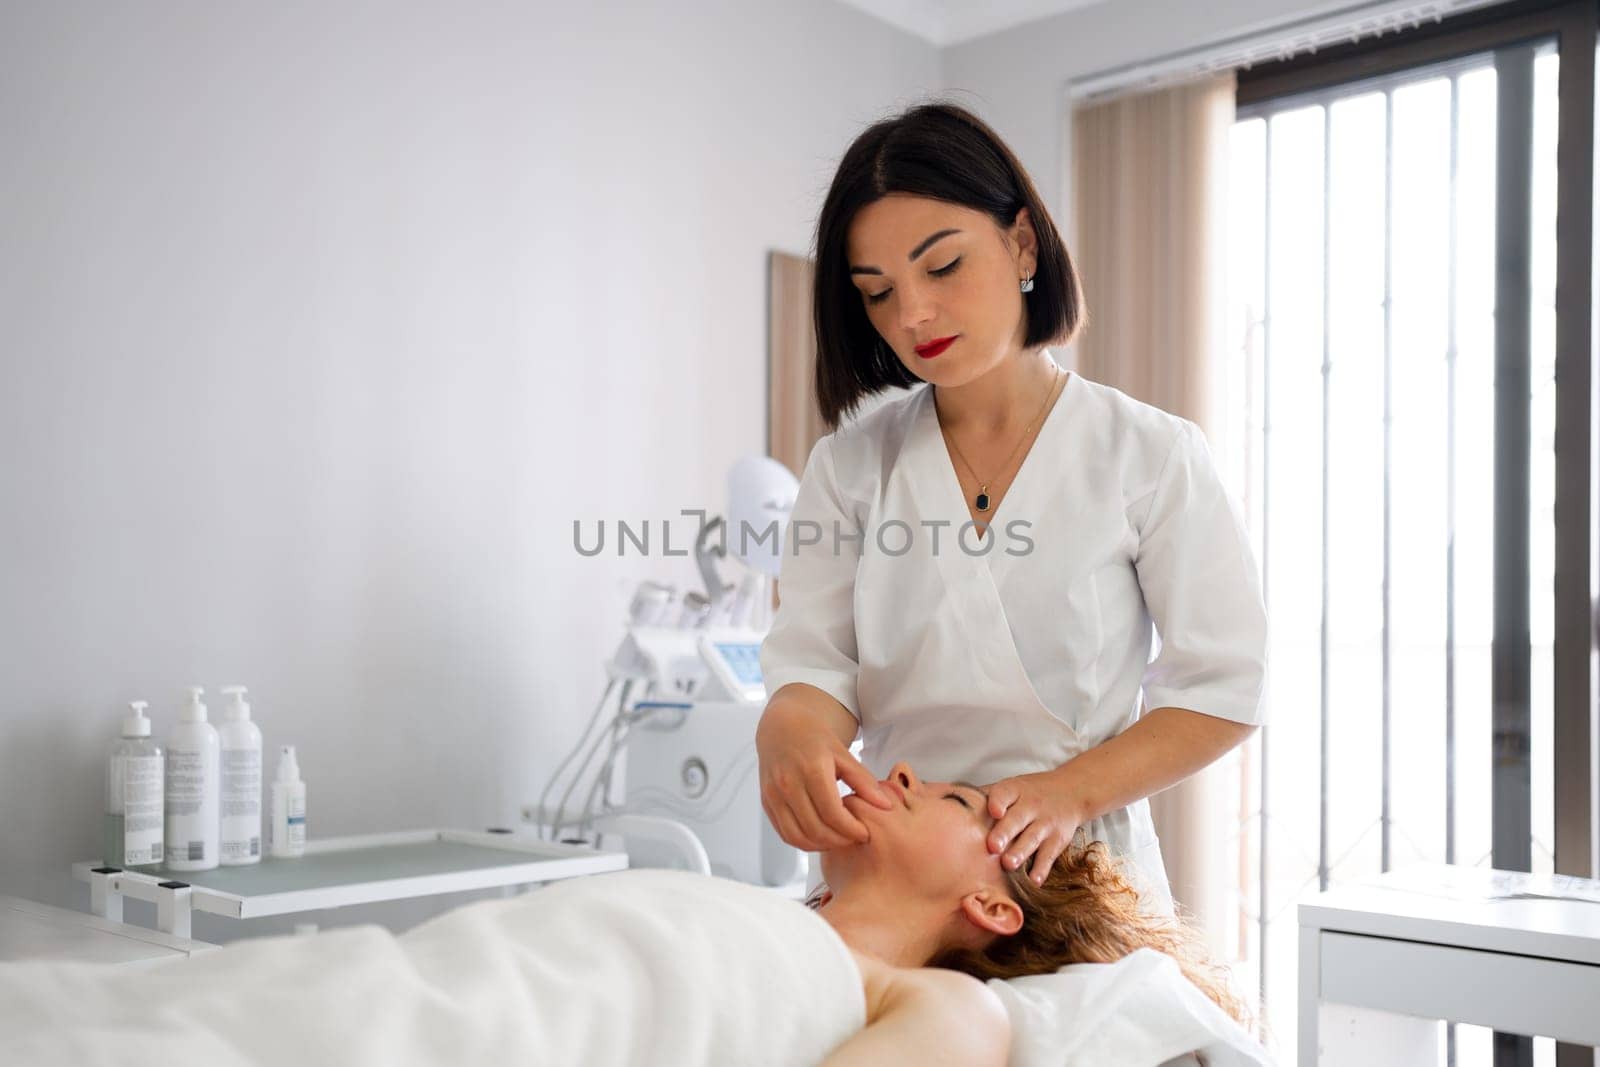 Massage therapist providing facial massage to woman at cosmetology clinic. Beautician administering skincare and stimulation procedures. Beauty salon offering spa treatments and massages.